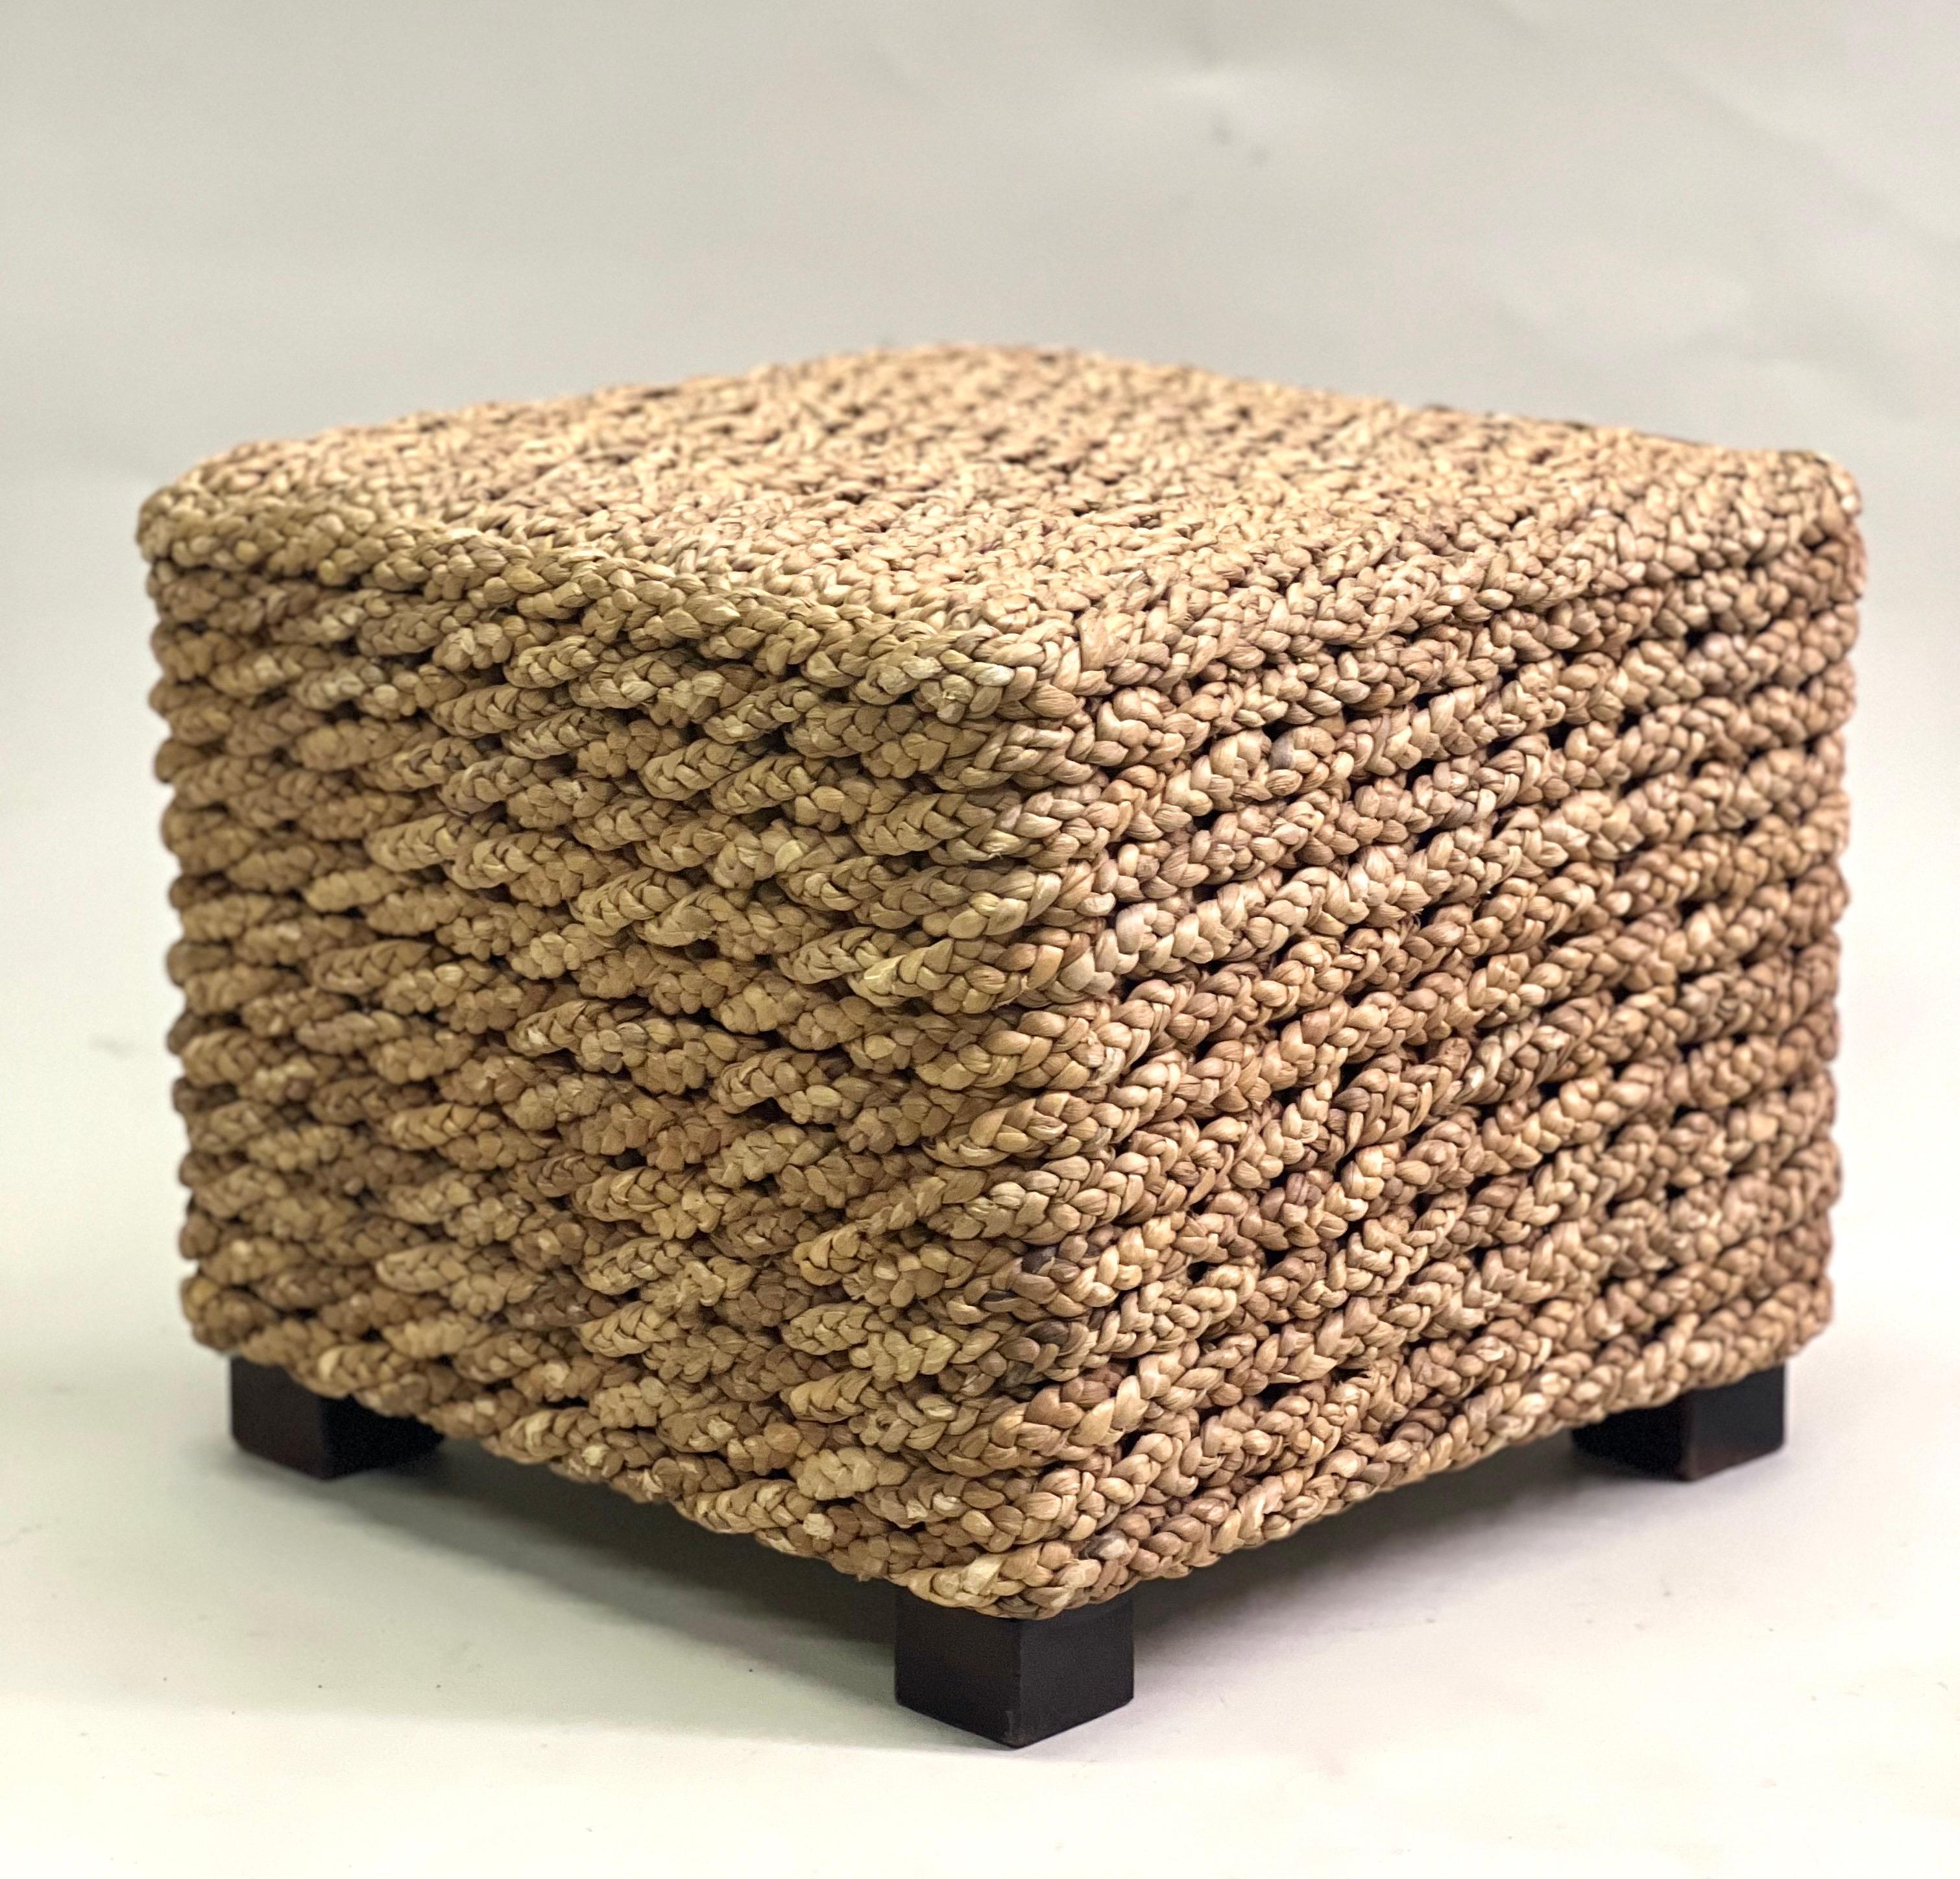 Hand-Crafted 1 French Mid-Century Rope Stool / Bench by Adrien Audoux & Frida Minet For Sale